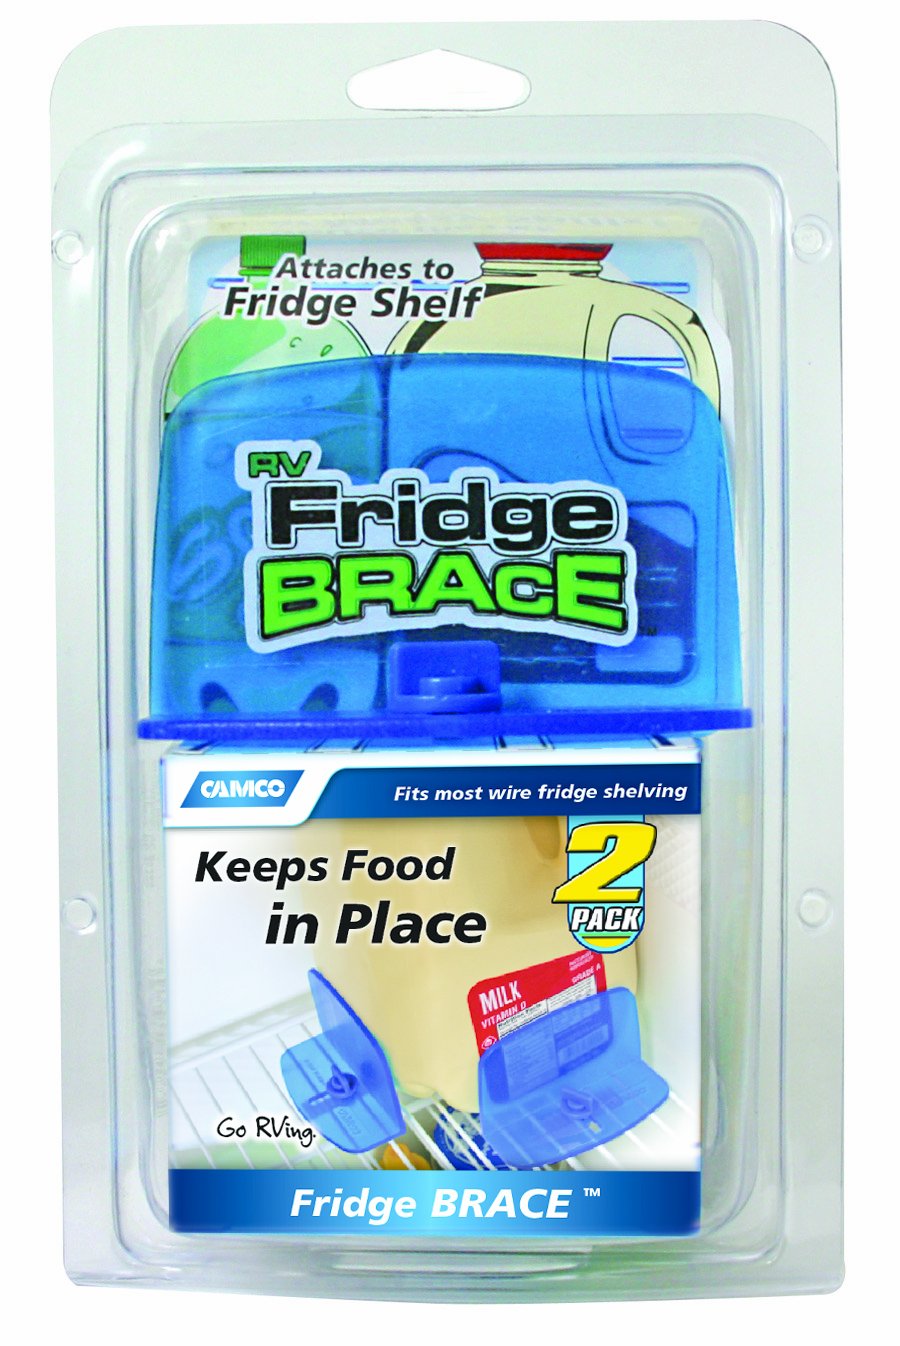 Camco RV Fridge Brace -Holds Food and Drinks in Place During Travel, Prevents Messy Spills Perfect For RVs, Boats, Camping and More - (2 Pack) (44033)